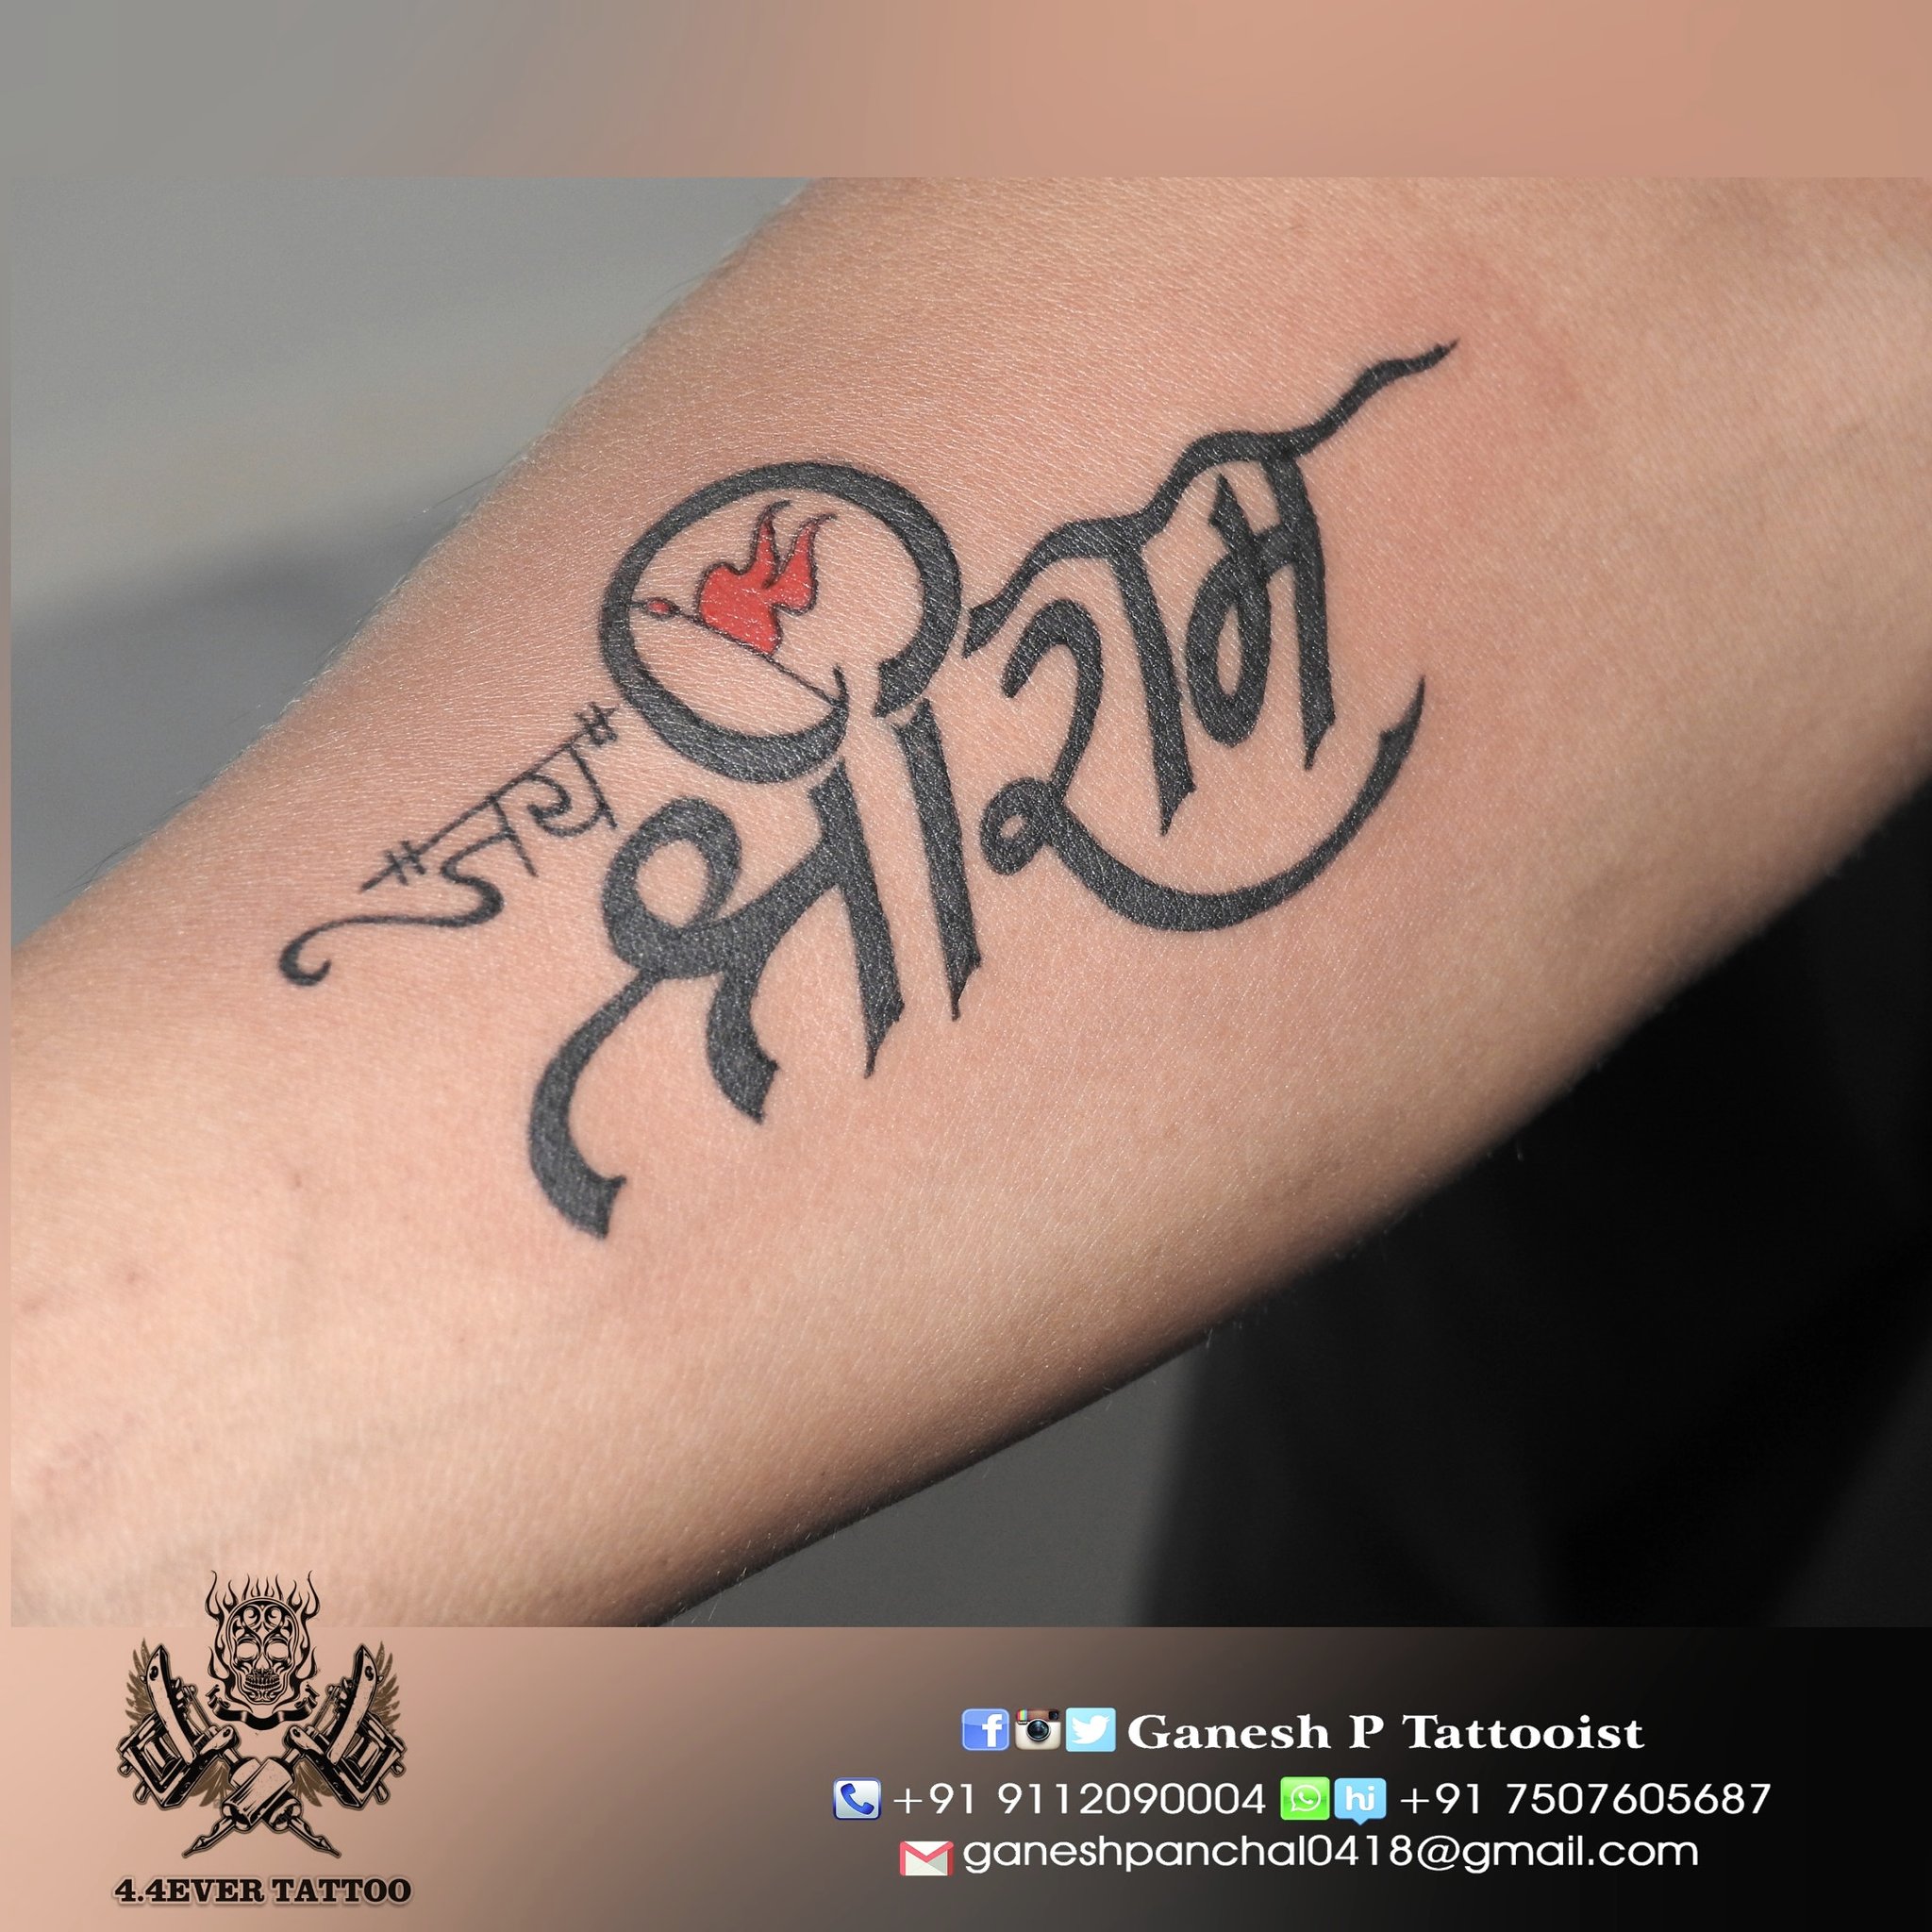 Pune Inks Tattoo Studio  Did this Ambigram style tattoo for a client who  wanted his name tattoo Anand with another hidden name in it This is what  we came up with 